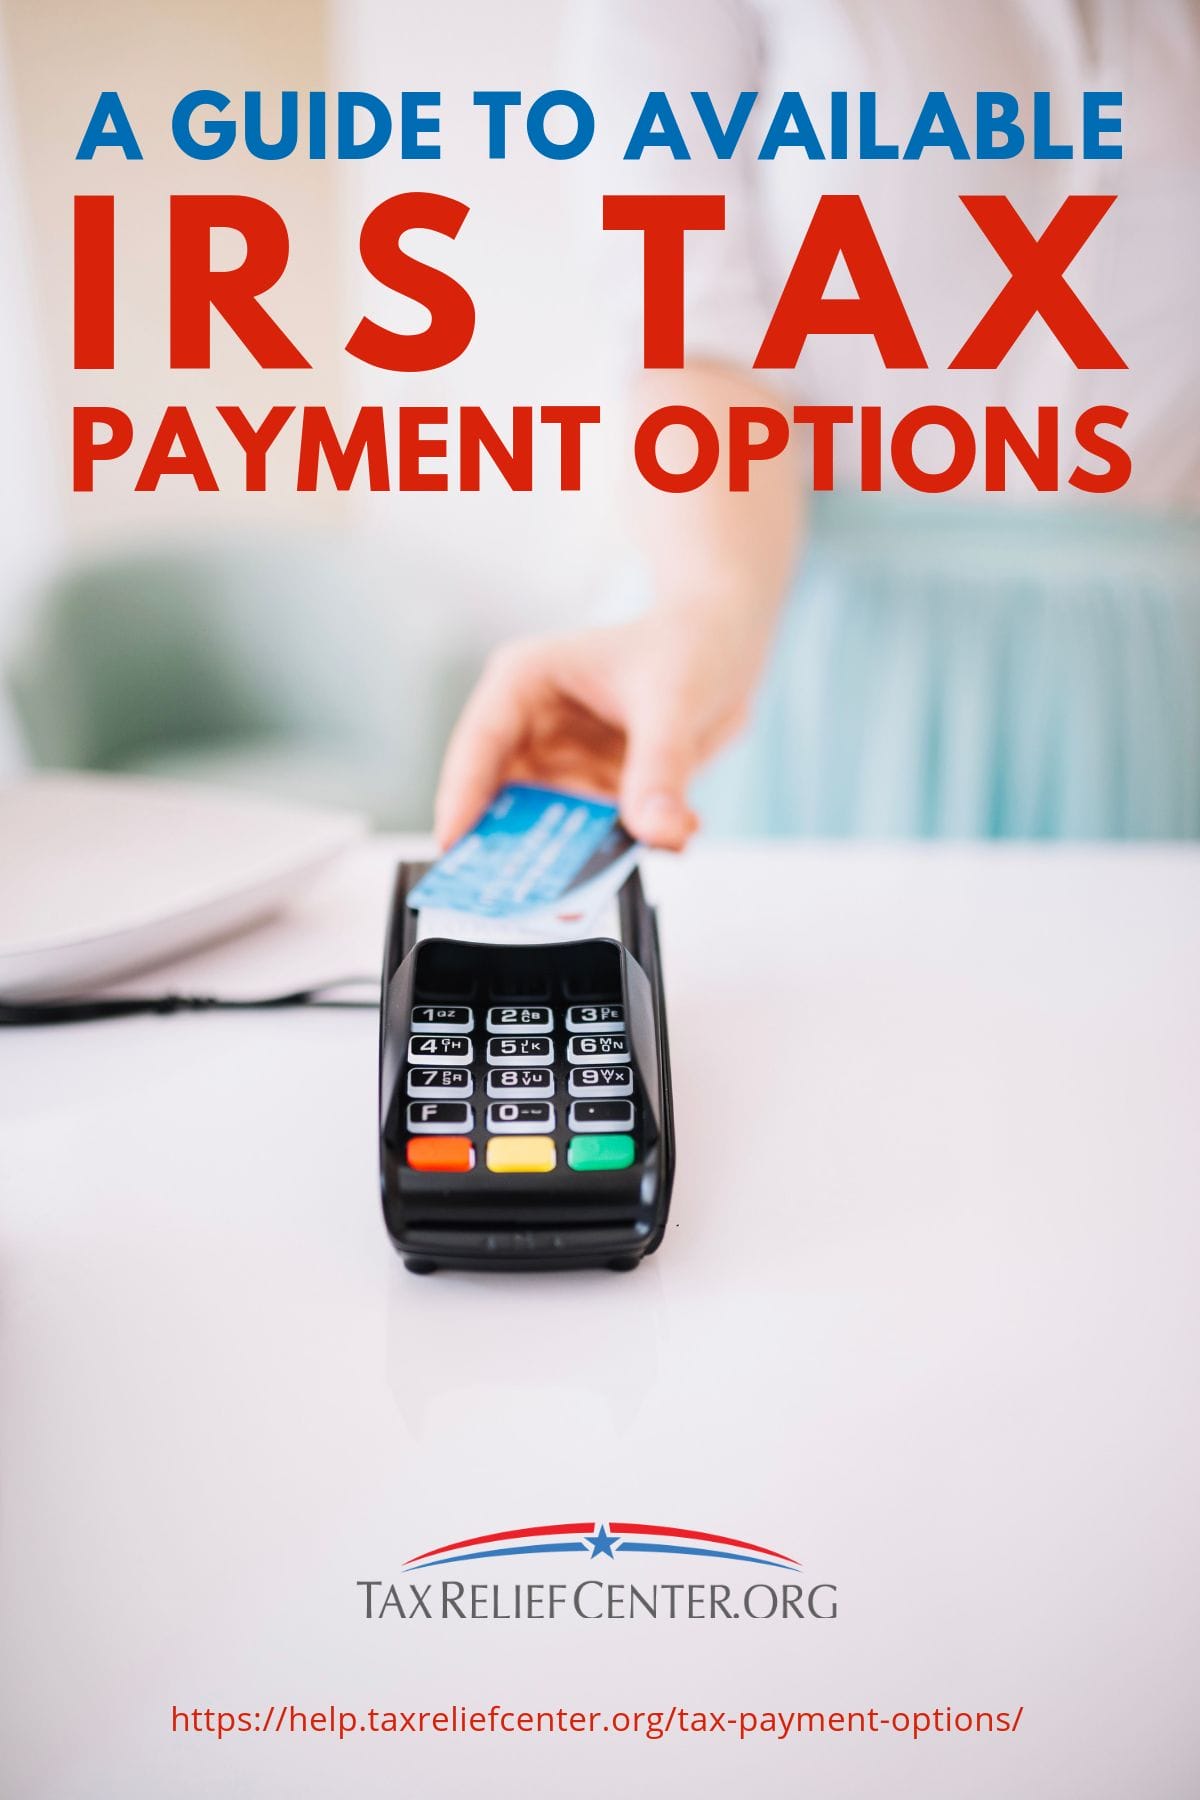 A Guide To Available IRS Tax Payment Options https://help.taxreliefcenter.org/tax-payment-options/